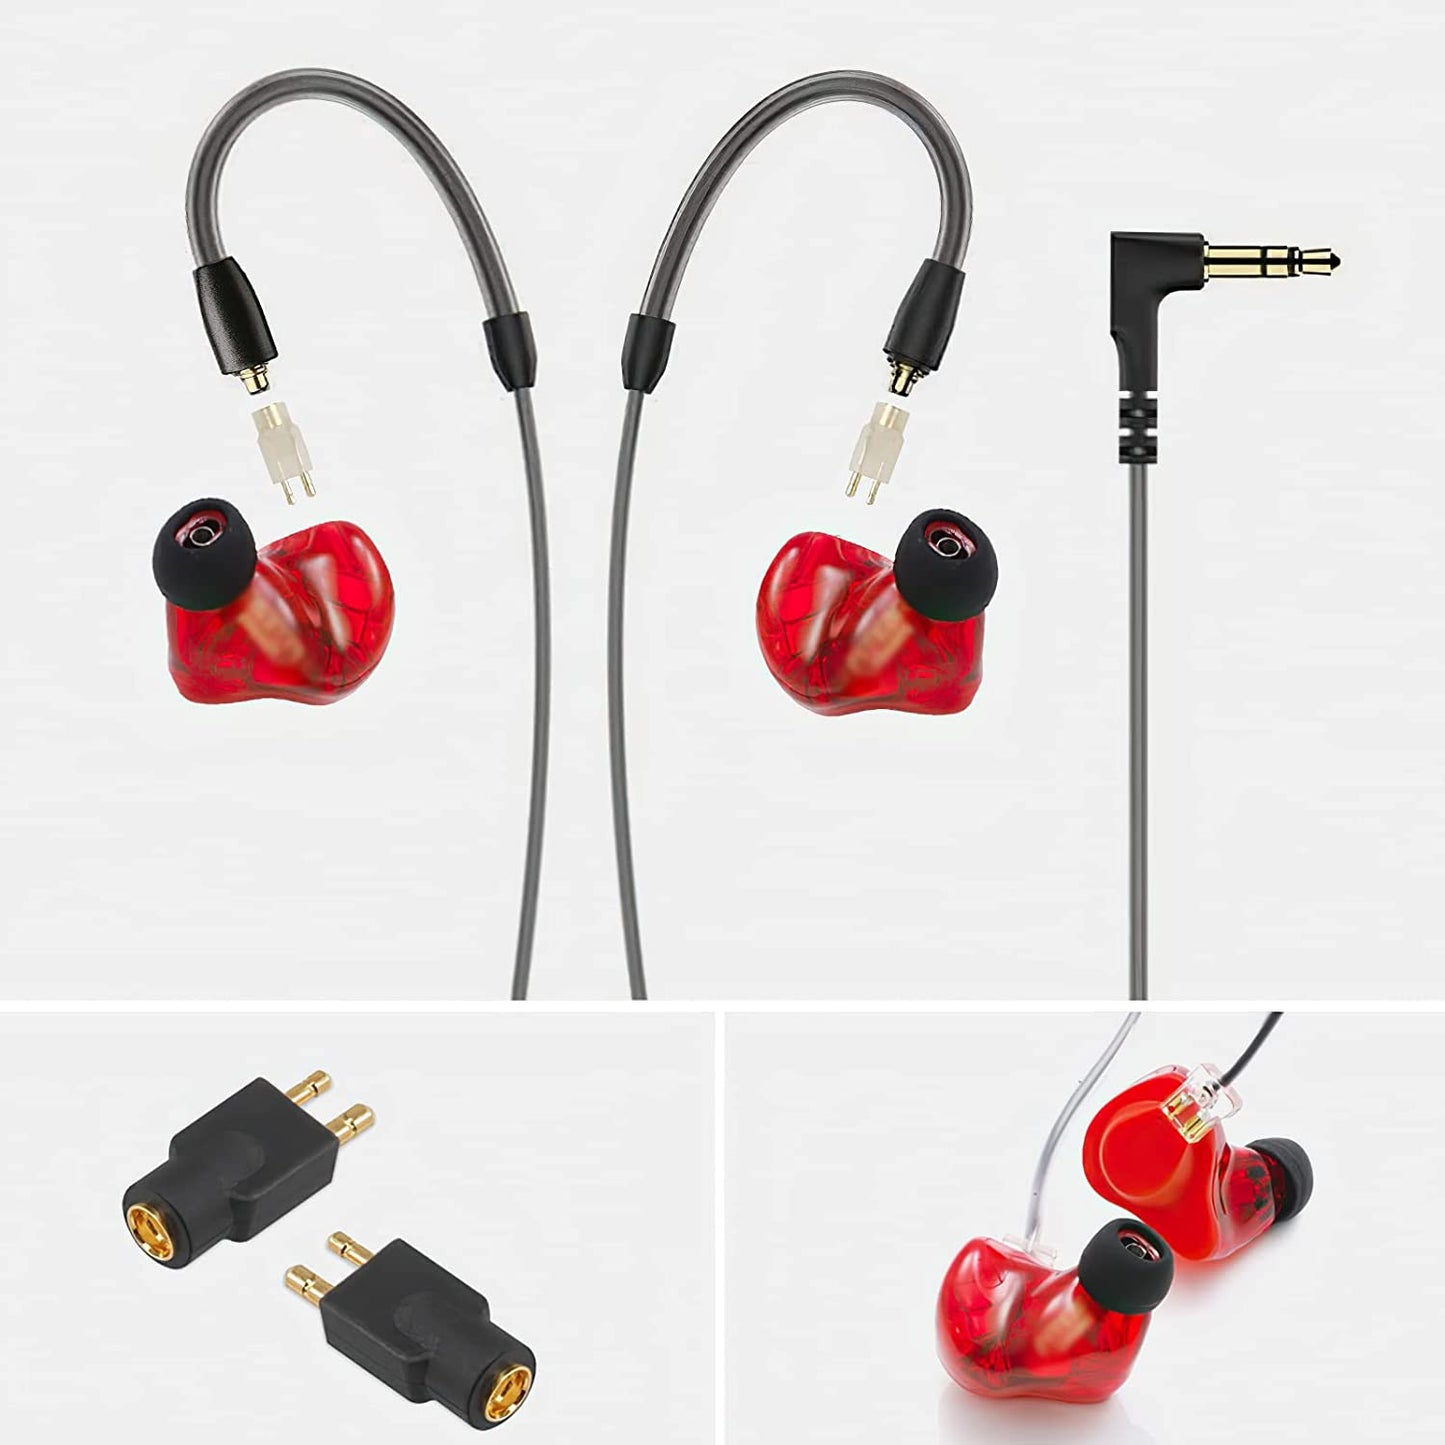 cooyin FitEar-MMCX 変換コネクター コネクターキット FitEar用 2Pinコネクタ（オス） to MMCXコネクタ（メス） MH334・MH335DW・TG223・TG333・TG334など適合 2個セット 透明